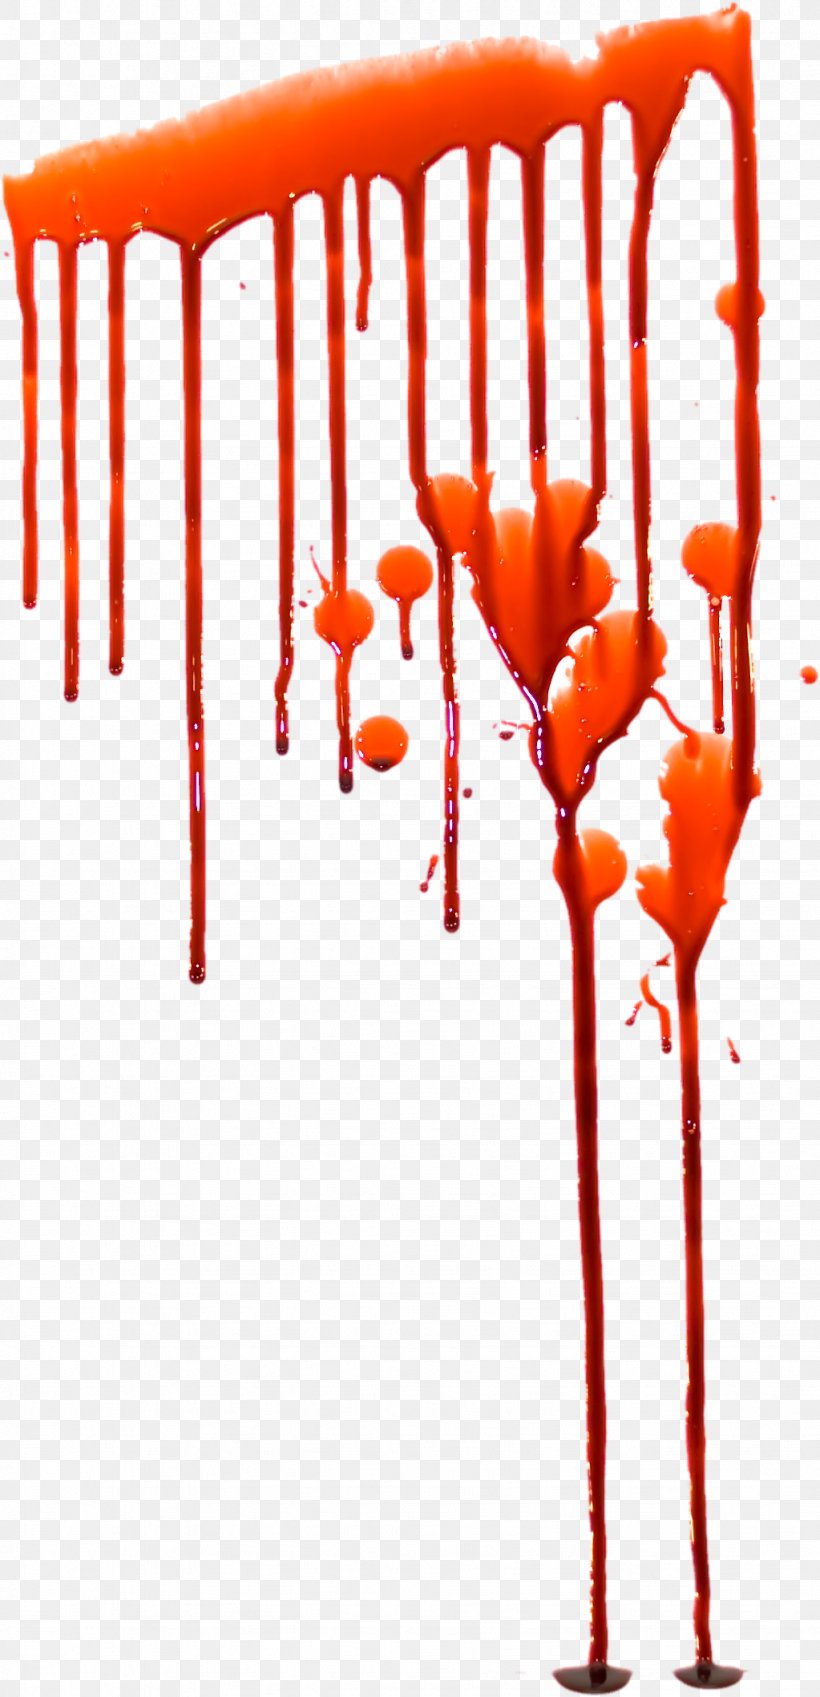 Blood Image Editing Clip Art, PNG, 1023x2118px, Blood, Blood Plasma, Image Editing, Image File Formats, Orange Download Free